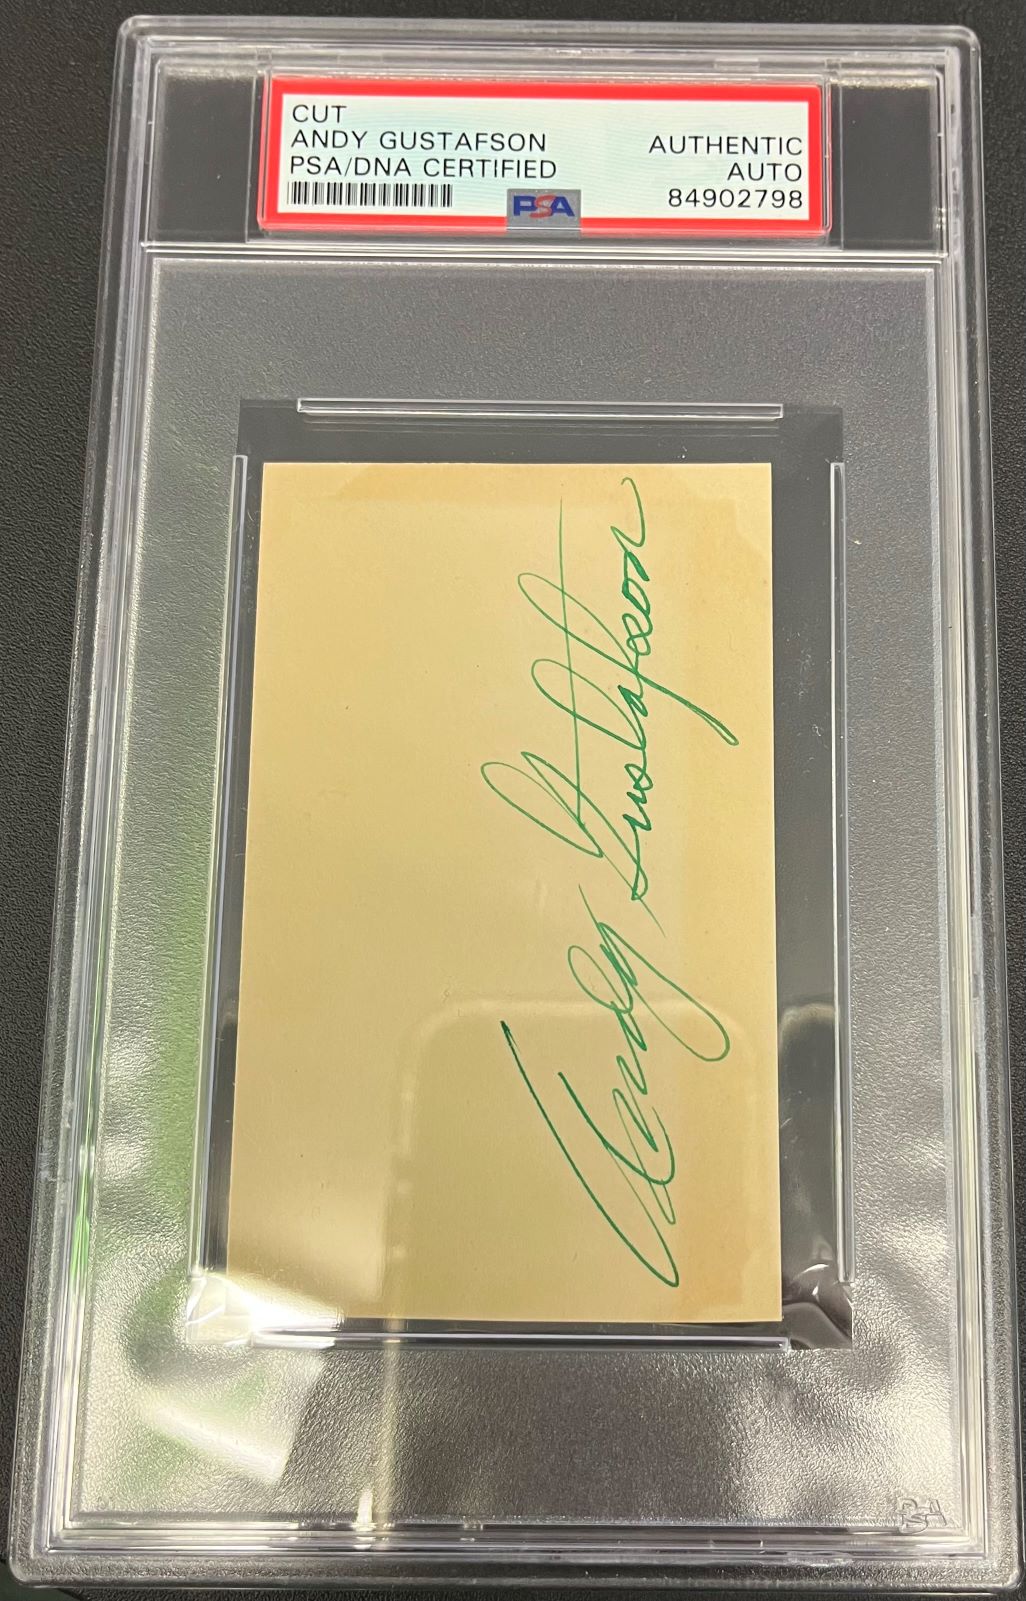 Andy Gustafson Signed Cut 